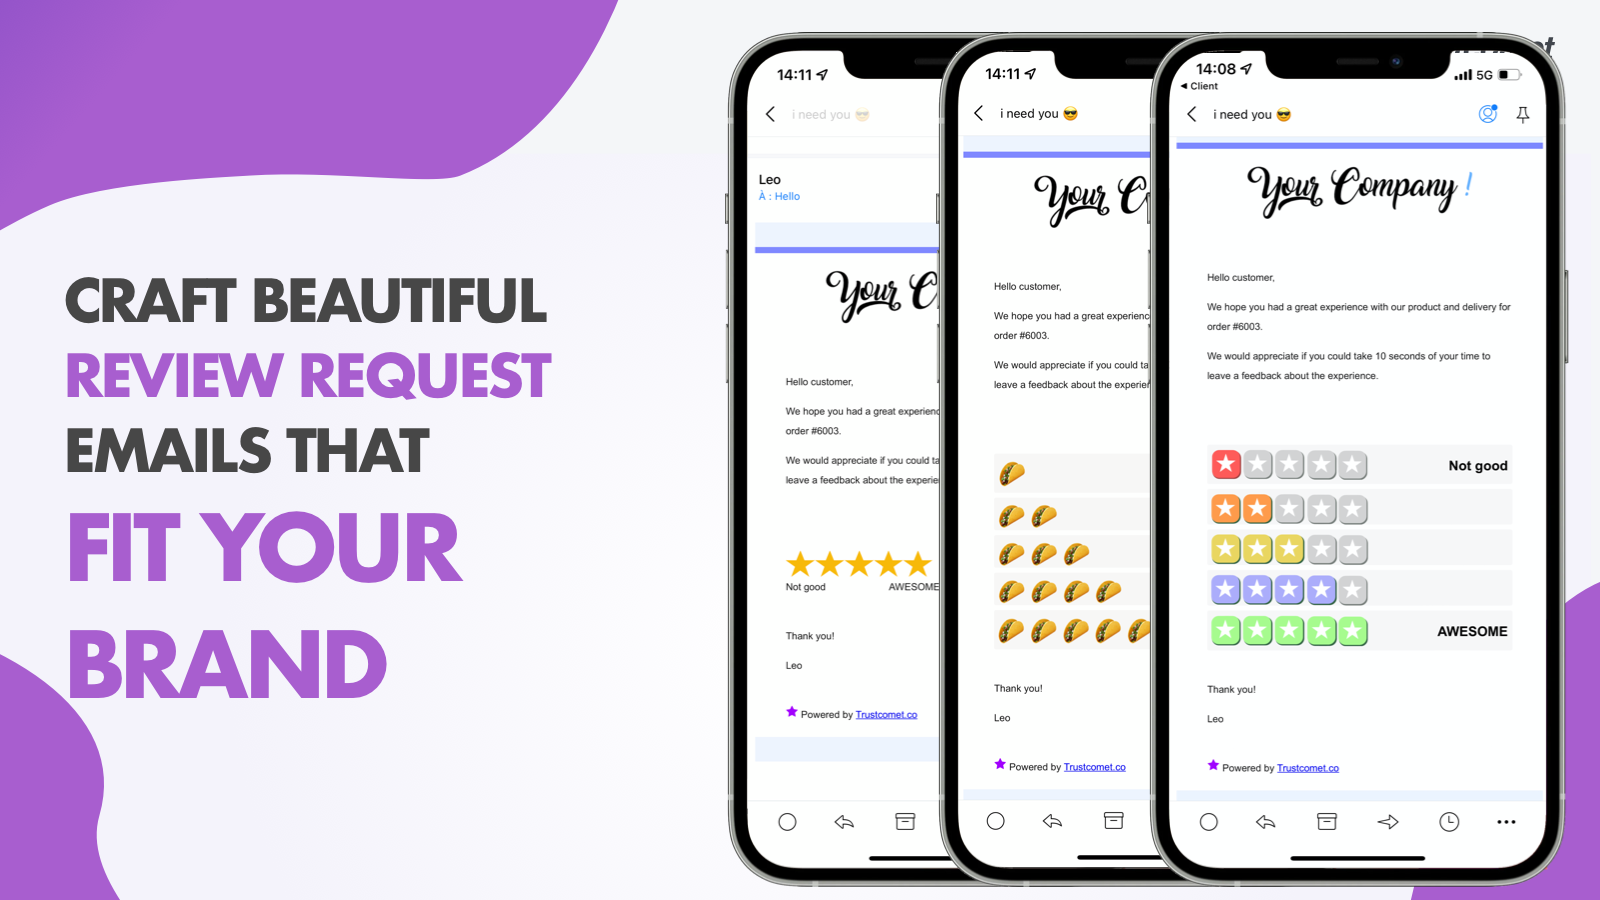 CRAFT BEAUTIFUL REVIEW REQUEST EMAILS